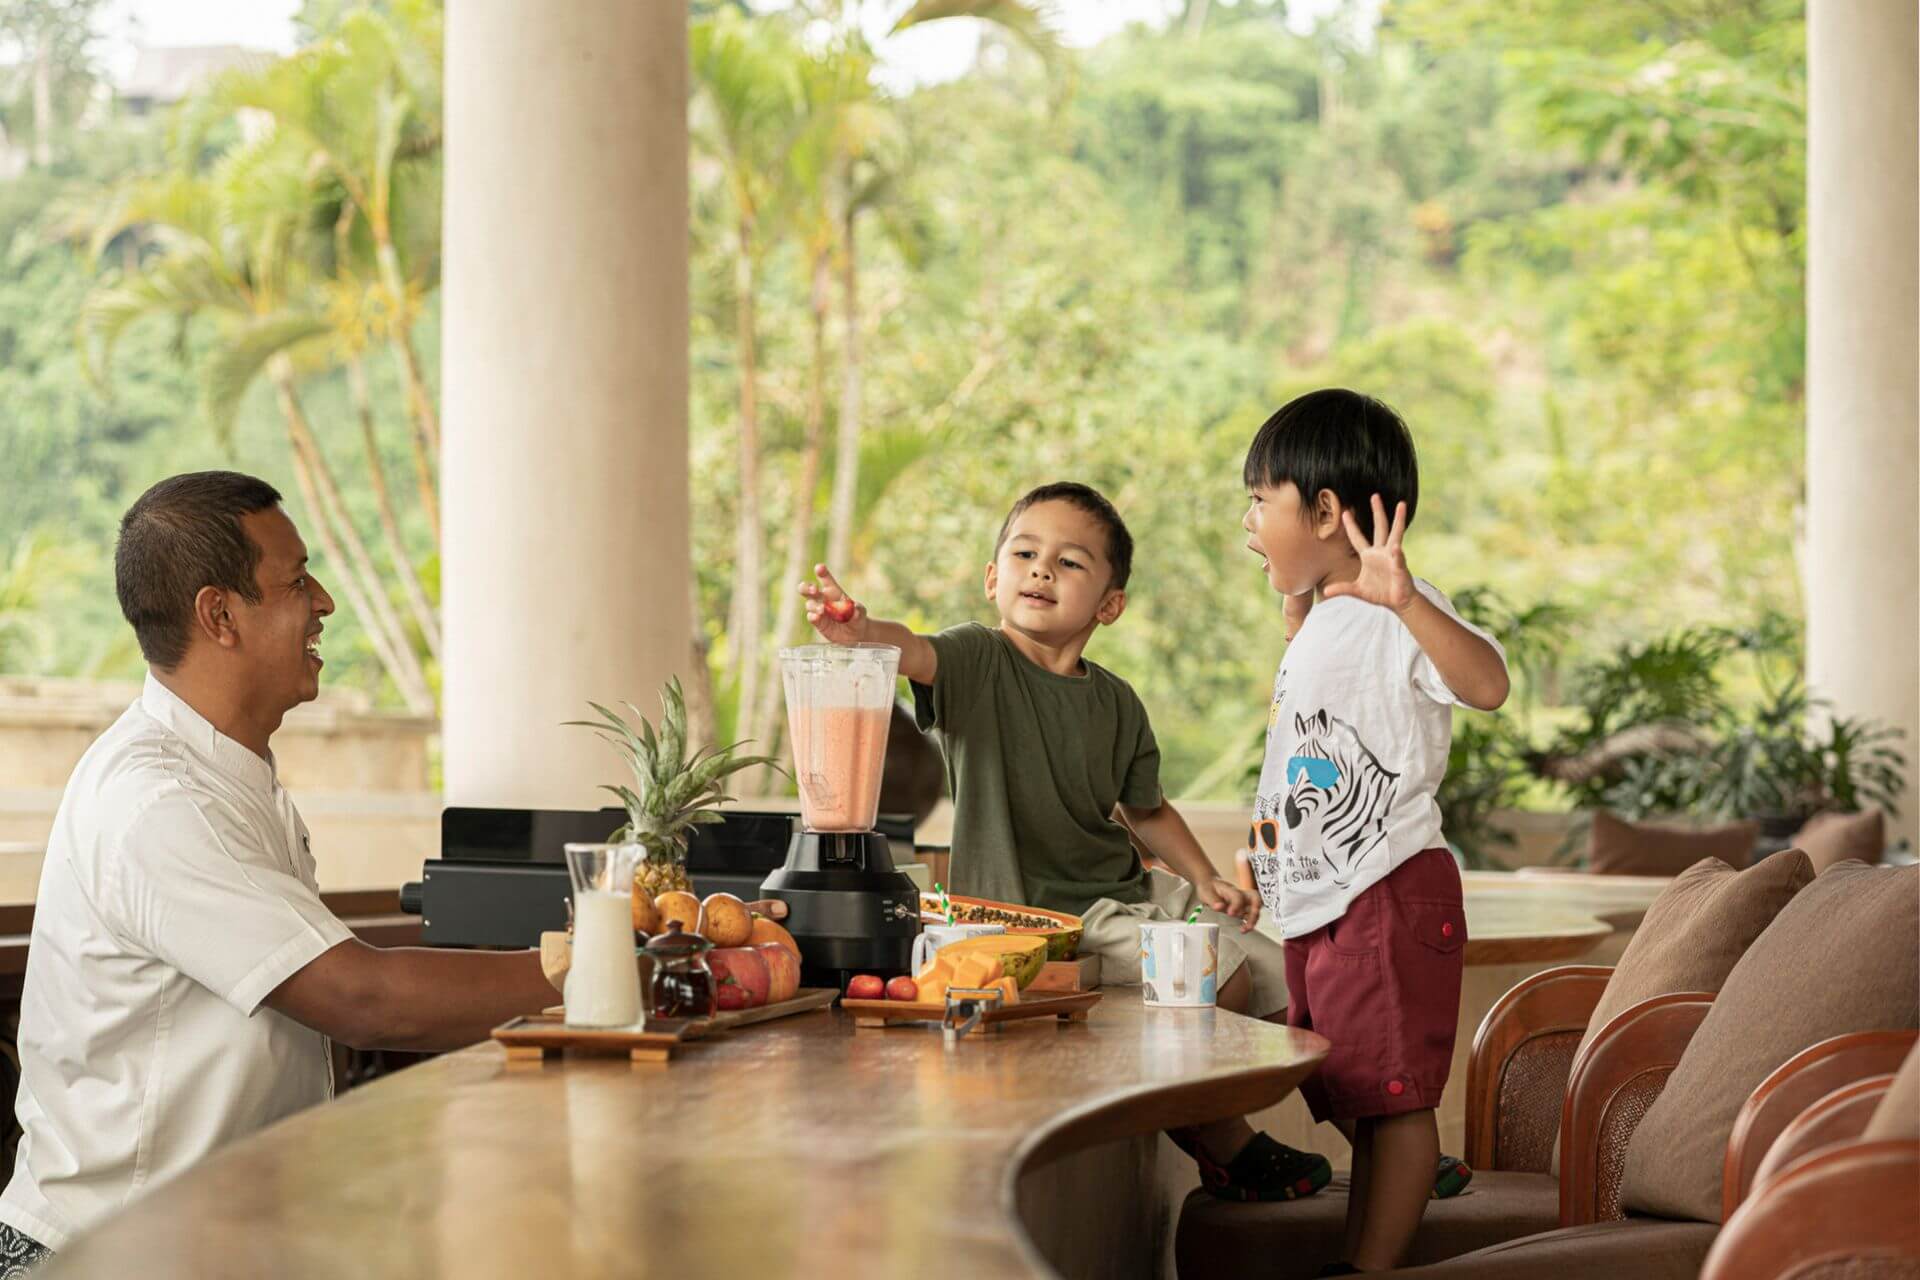 Four Seasons Resort Bali at Sayan is a recommended option to enjoy Bali with kids